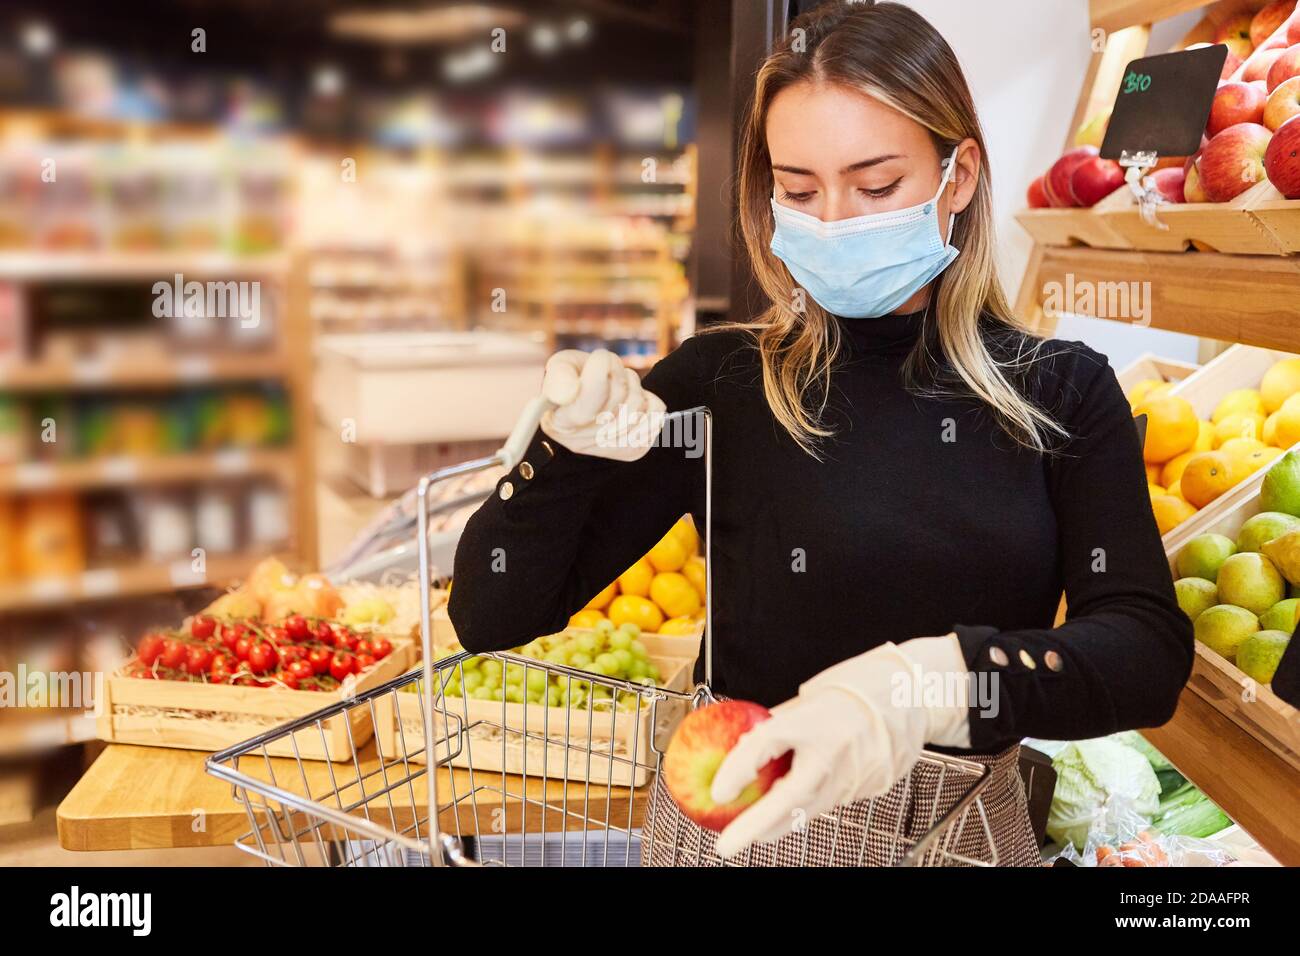 Woman as a customer with face mask when shopping in the supermarket because of the Covid-19 pandemic Stock Photo